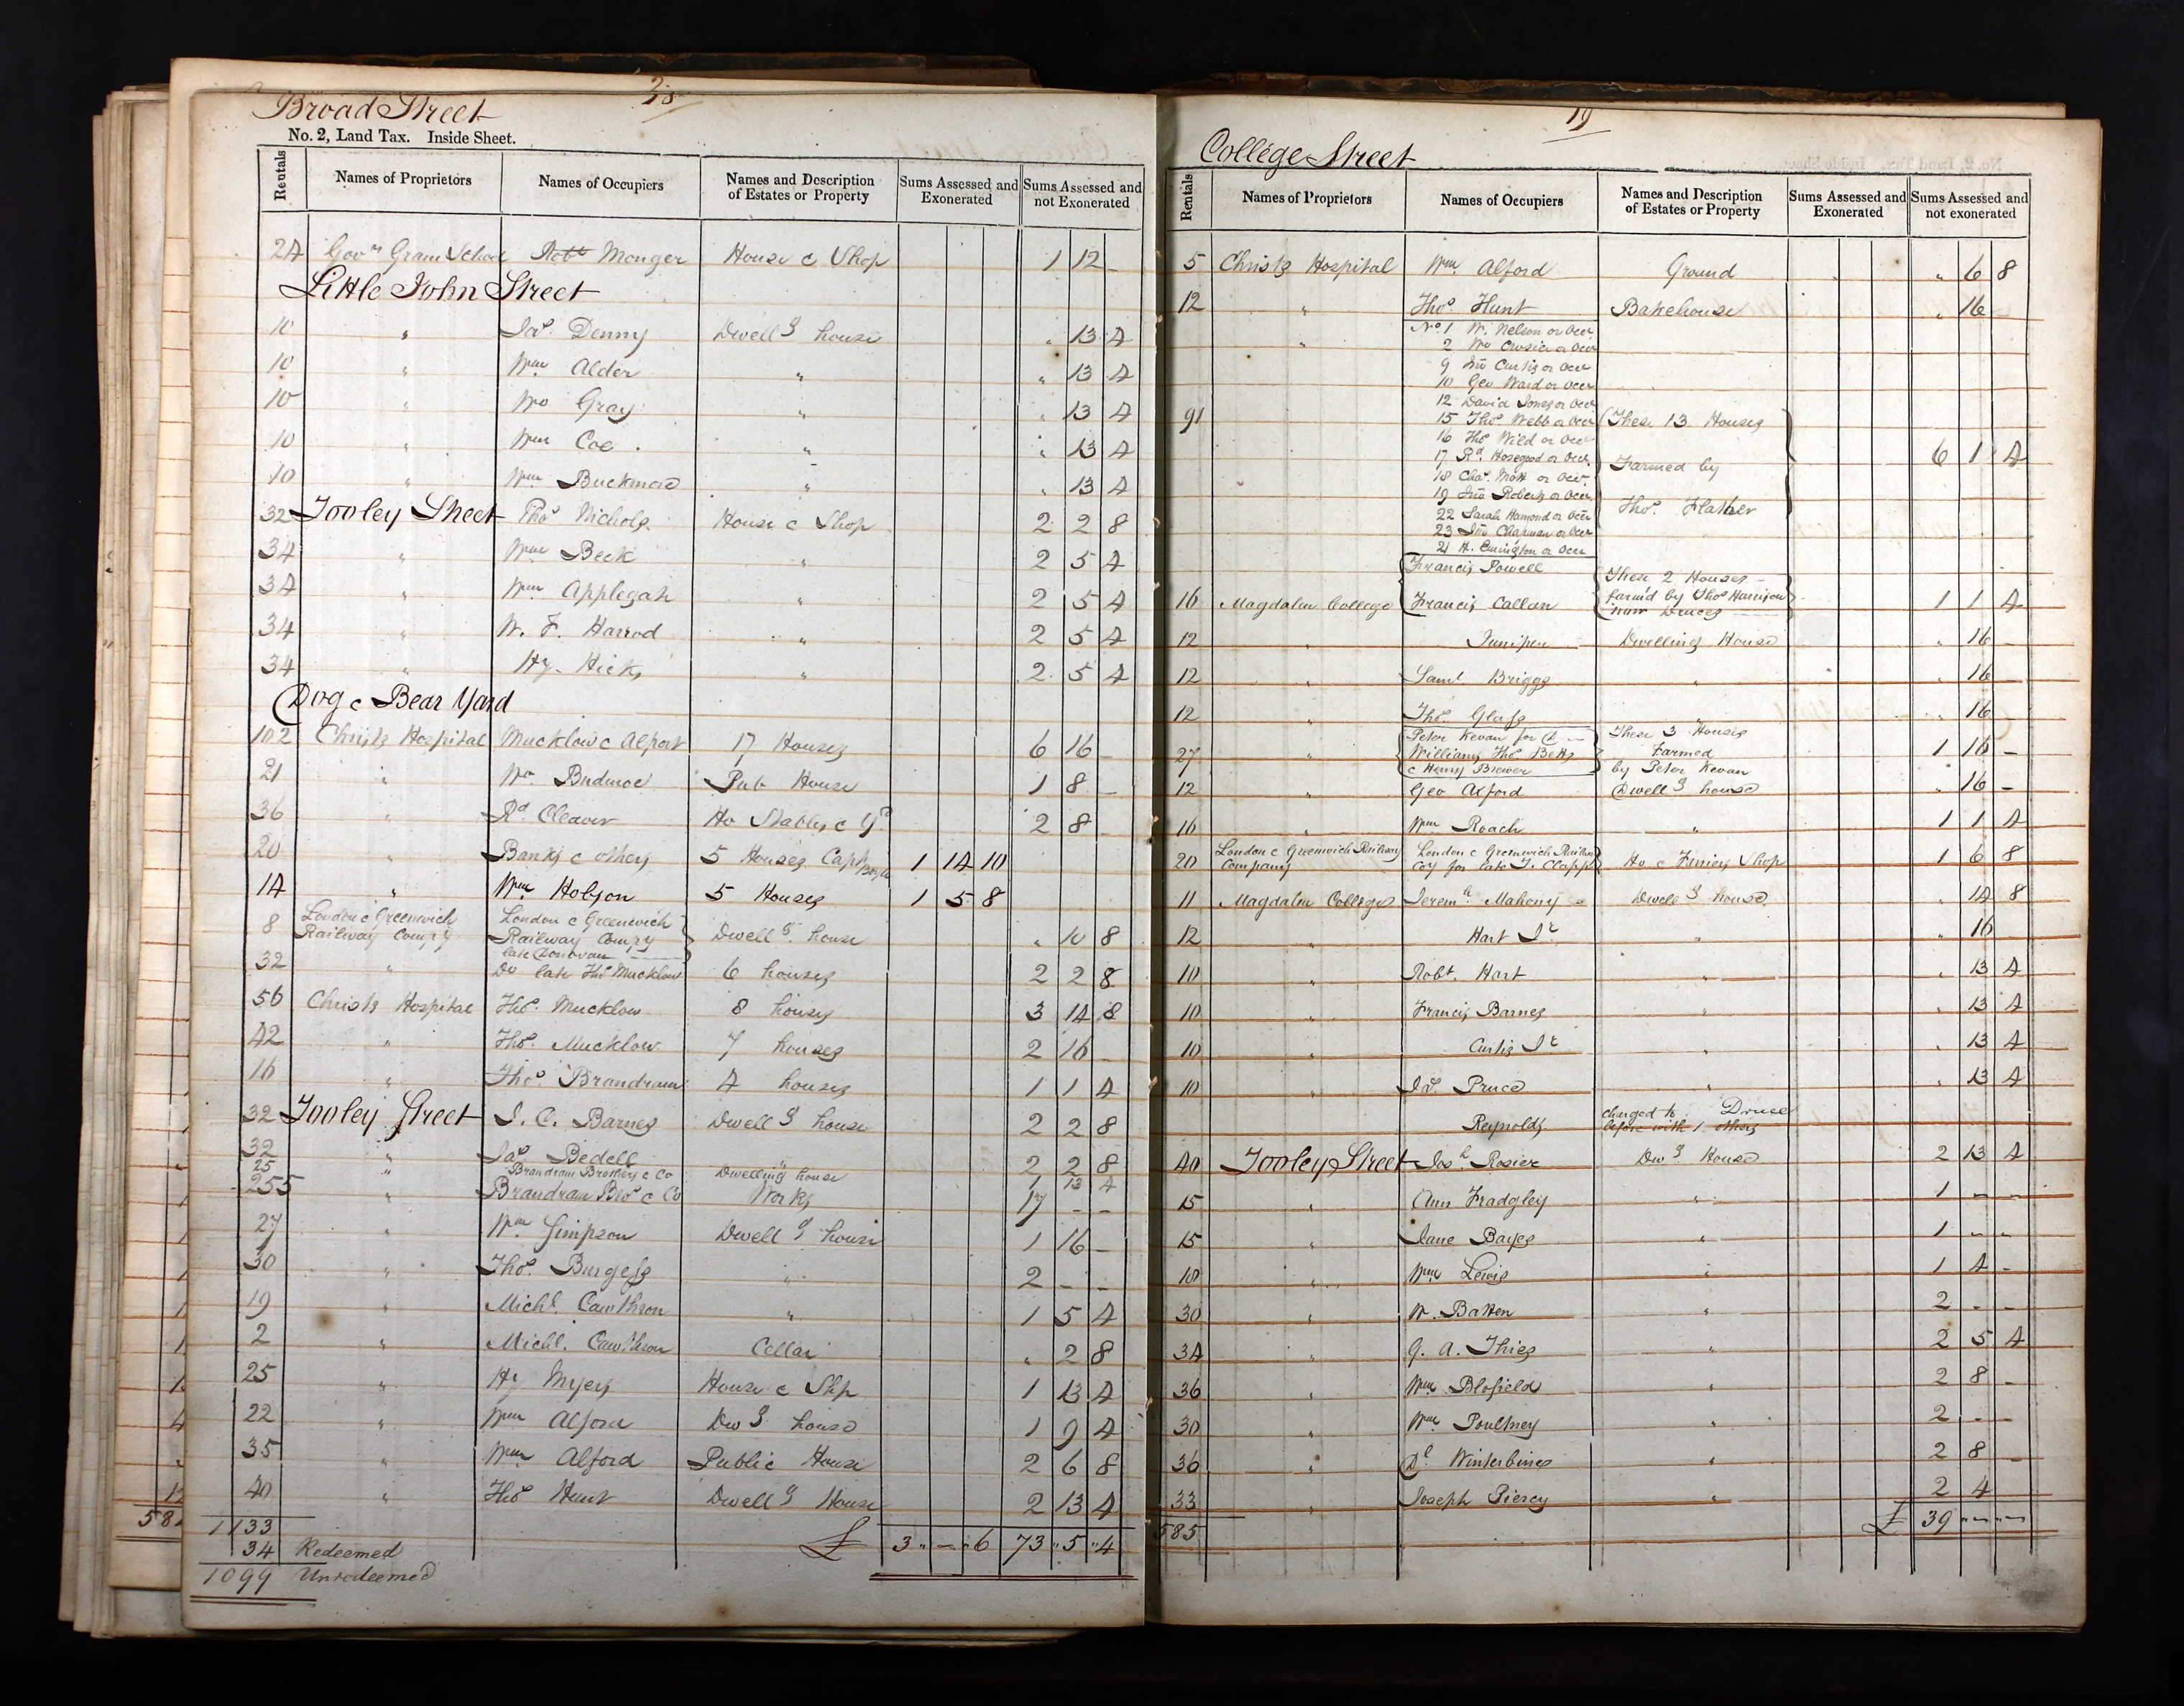 Peter Kevan, land tax records 1836 - shows he was responsible for 3 cottages which were farmed